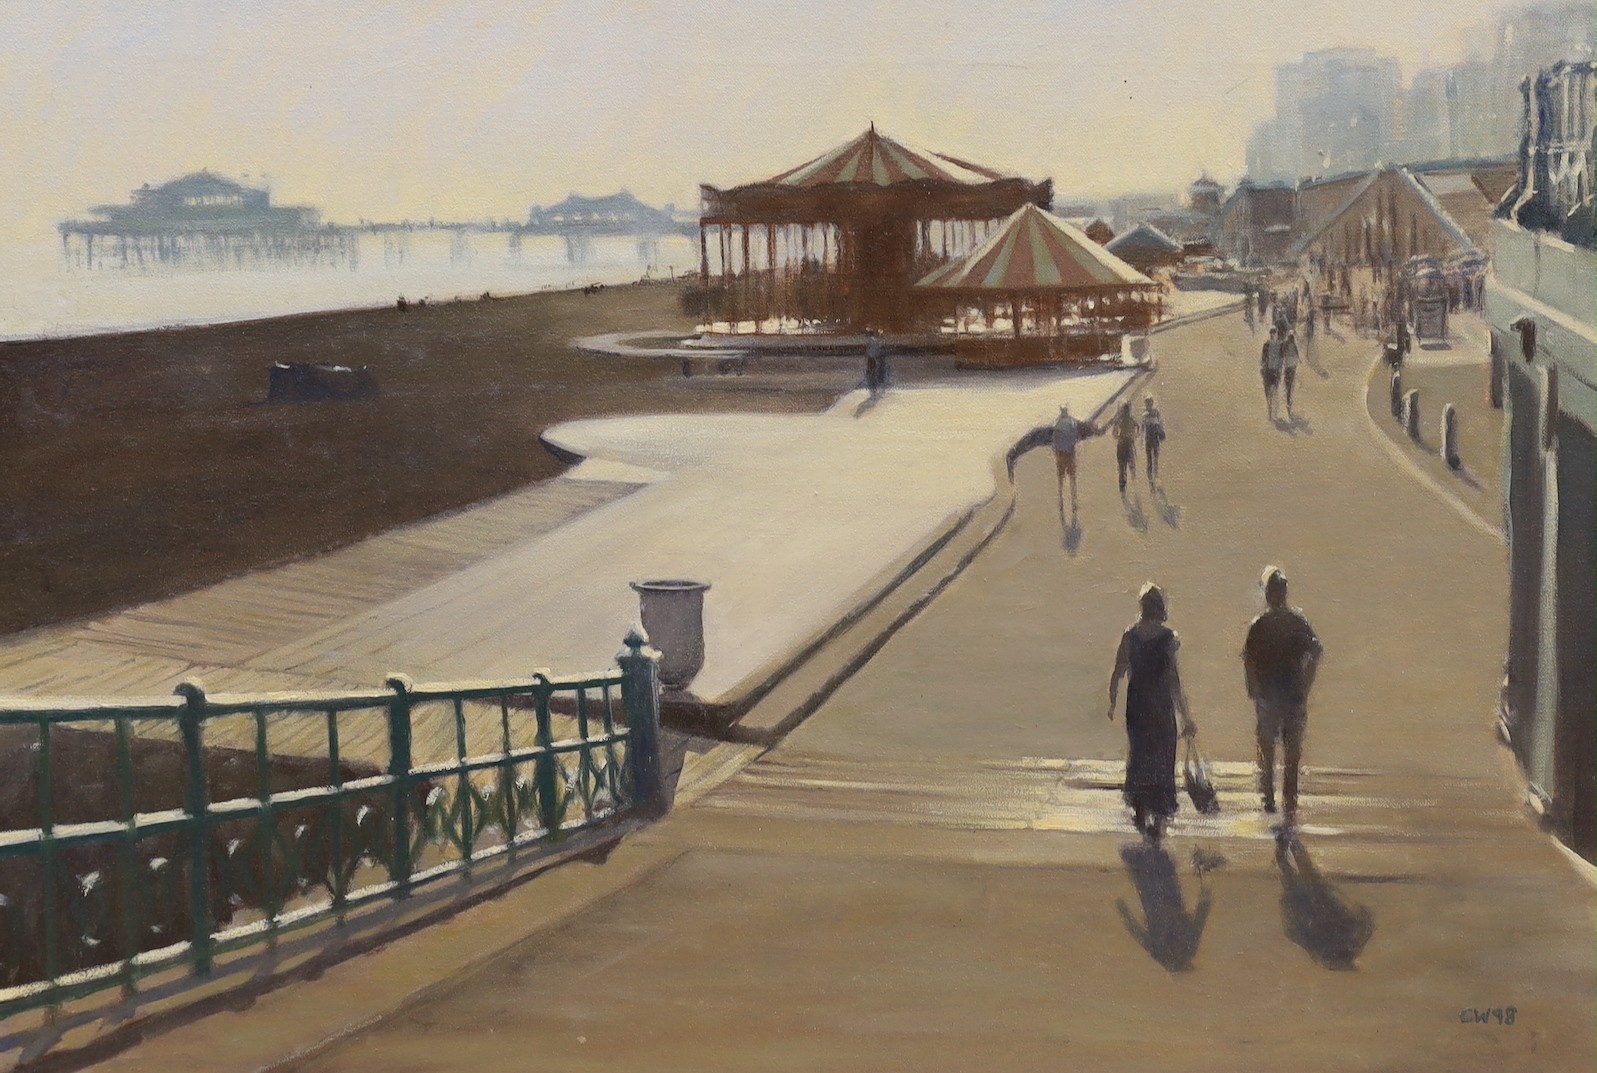 Colin Willey, oil on canvas, Brighton esplanade looking west, initialled and dated ‘98, unframed, 51 x 76.5cm